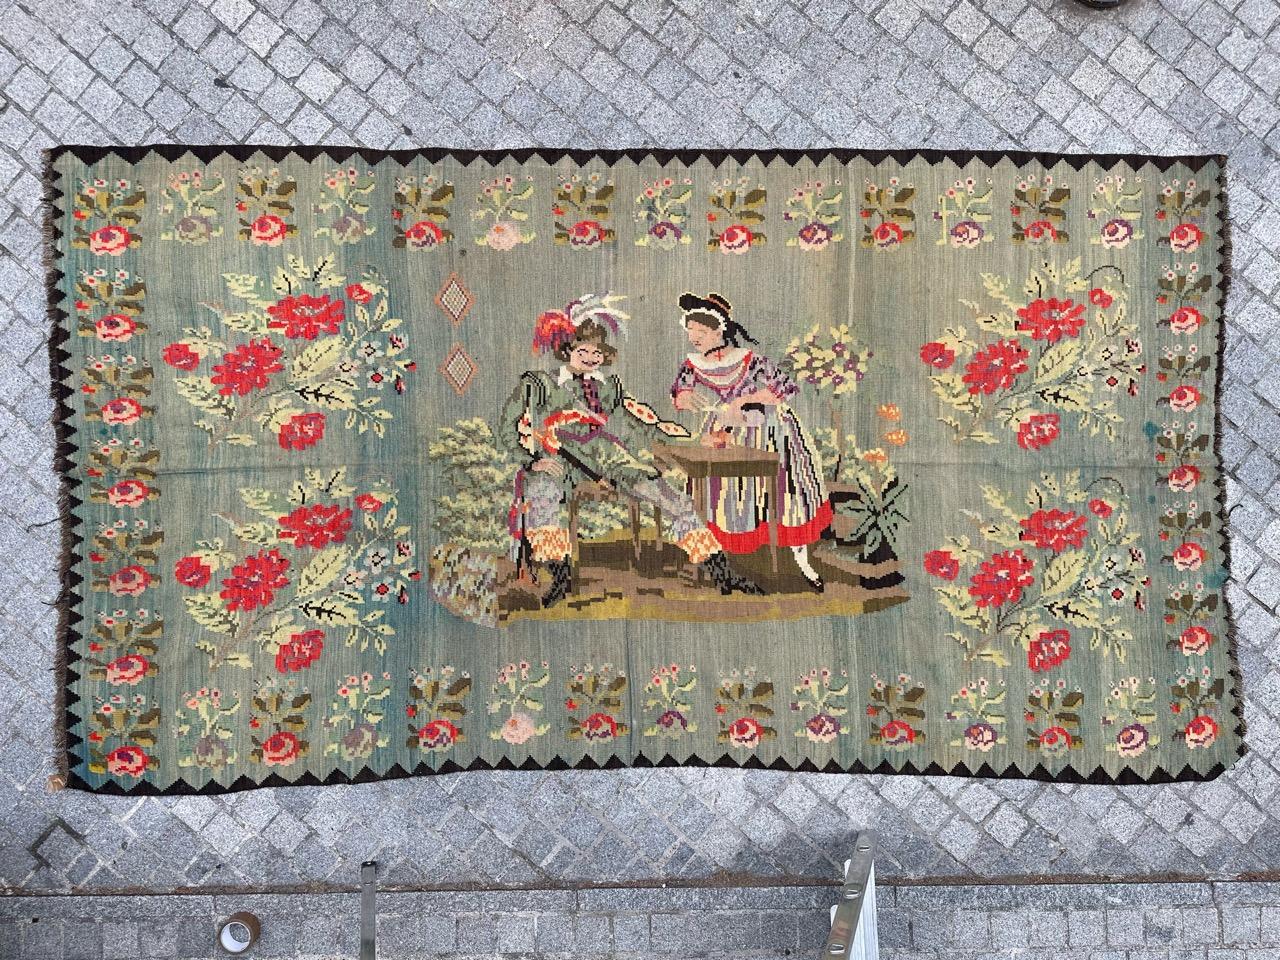 Introducing a stunning vintage Karabagh tapestry or Kilim: A true masterpiece of craftsmanship. This exquisite piece features an intricate design portraying a couple surrounded by vibrant flowers, woven entirely by hand using wool on a wool